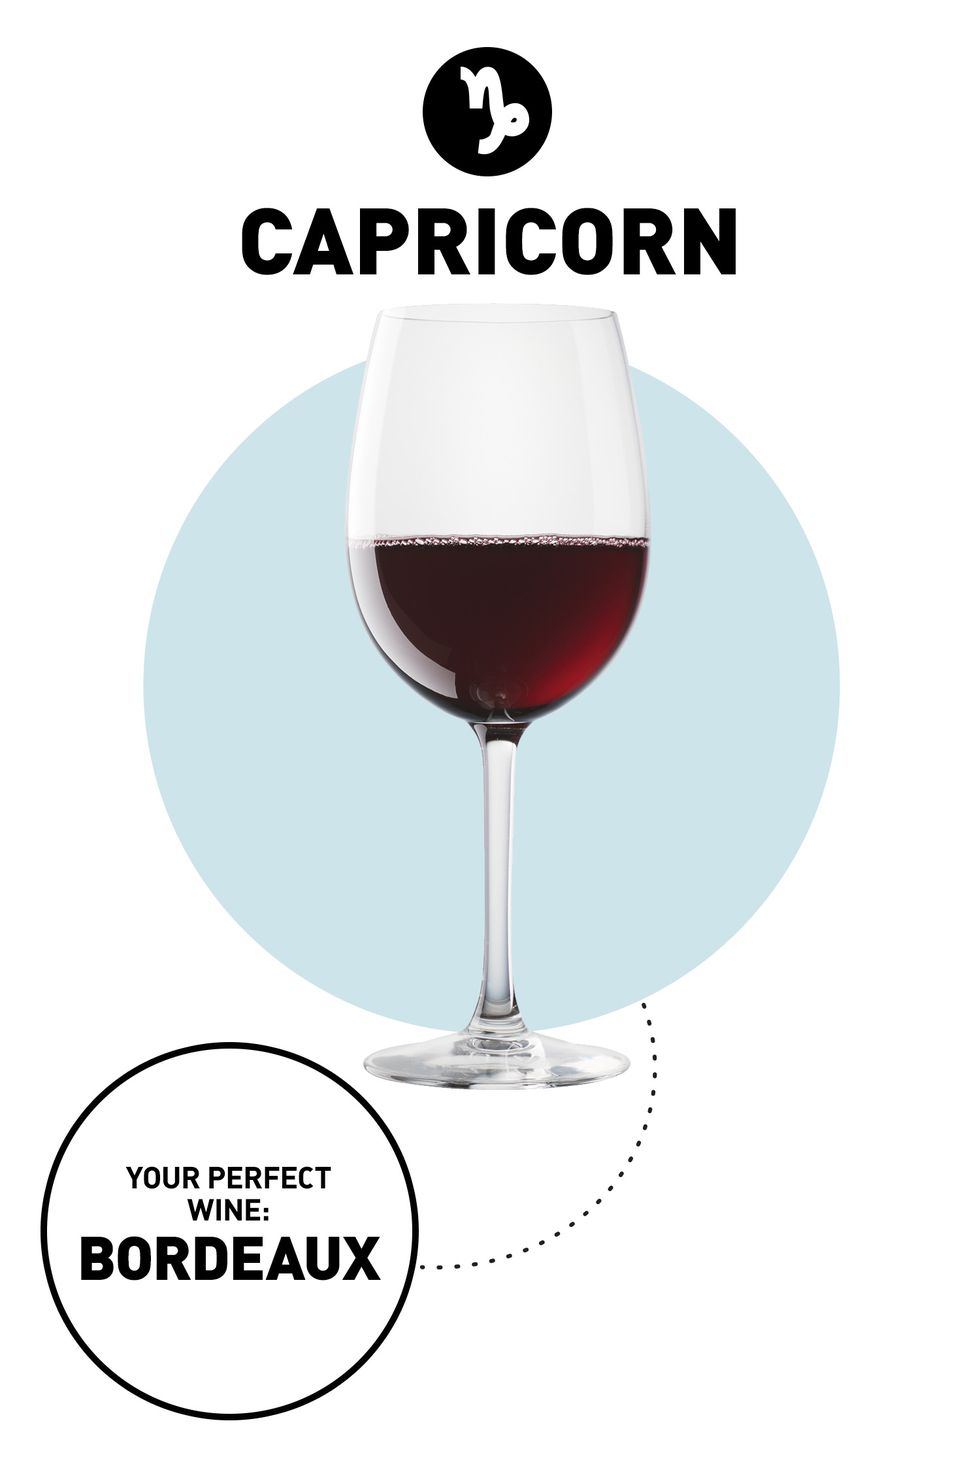 <p><strong>Your Drink: </strong>Bordeaux</p><p><strong>Why:</strong> To quote Taylor Swift, "we never go out of style"—and your drink shouldn't, either. Bordeaux is every bit as timeless as your taste. It's a classic for a reason, and as someone who values quality and consistency, you'll rest easy knowing that any bottle you buy will have a reliably oaky, full-bodied flavor.</p>